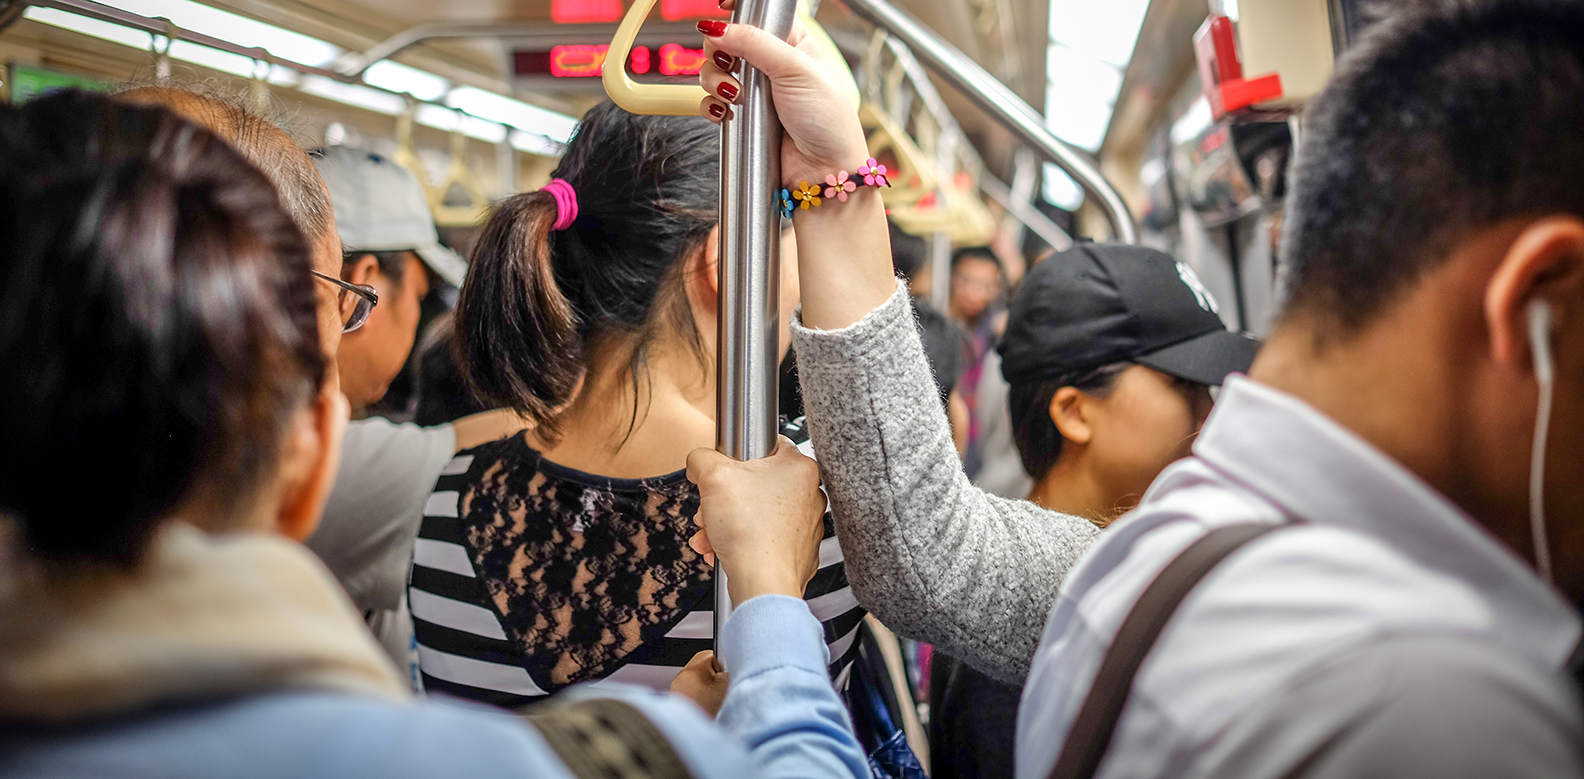 THE ART OF COMMUTING: FINDING THE BEST WAYS TO TRAVEL